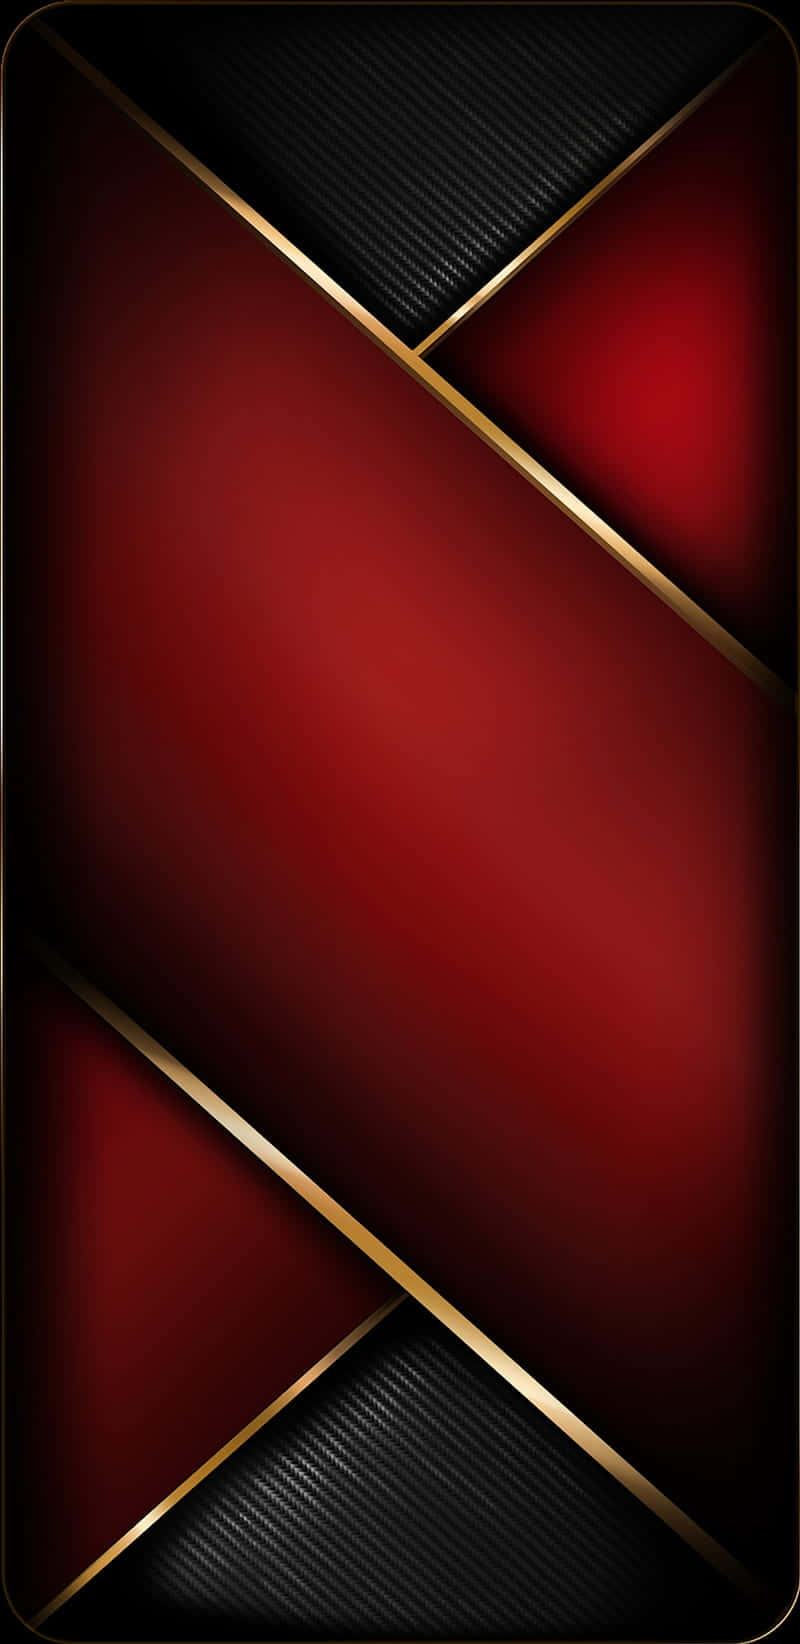 Engaging Patterns of Red and Gold Wallpaper